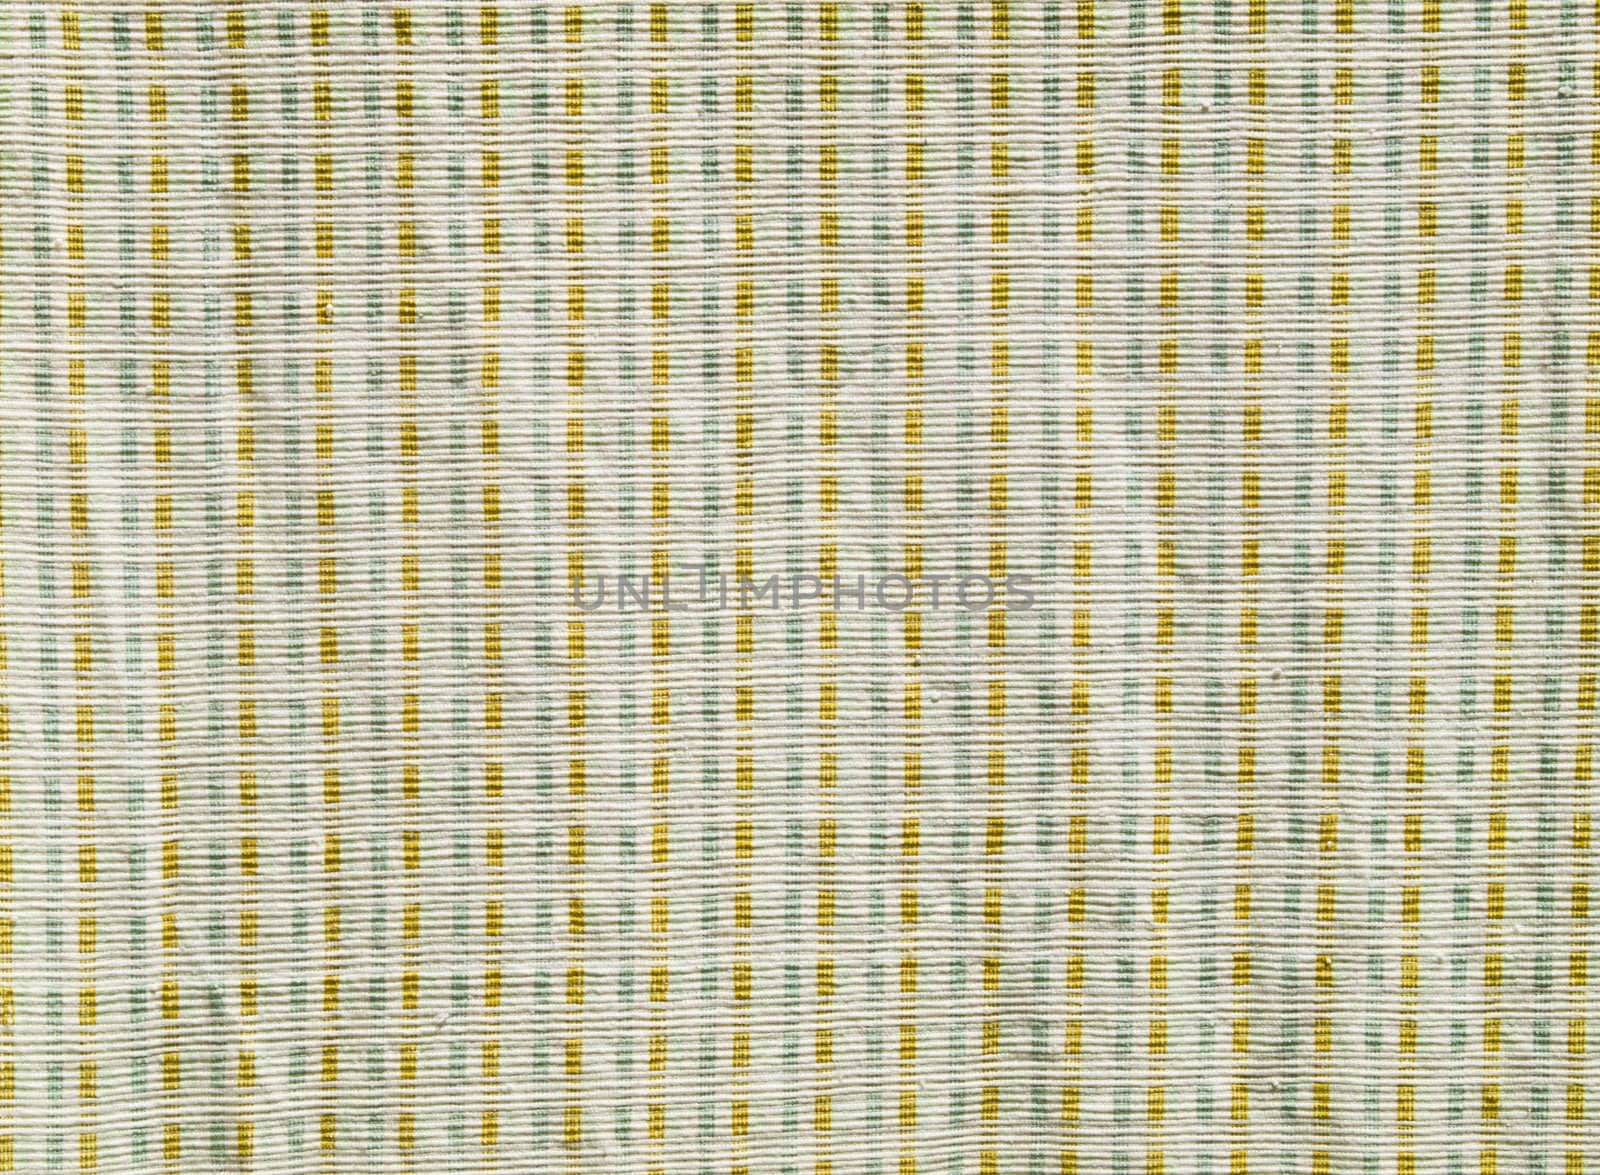 Cotton fabric from Thailand as background